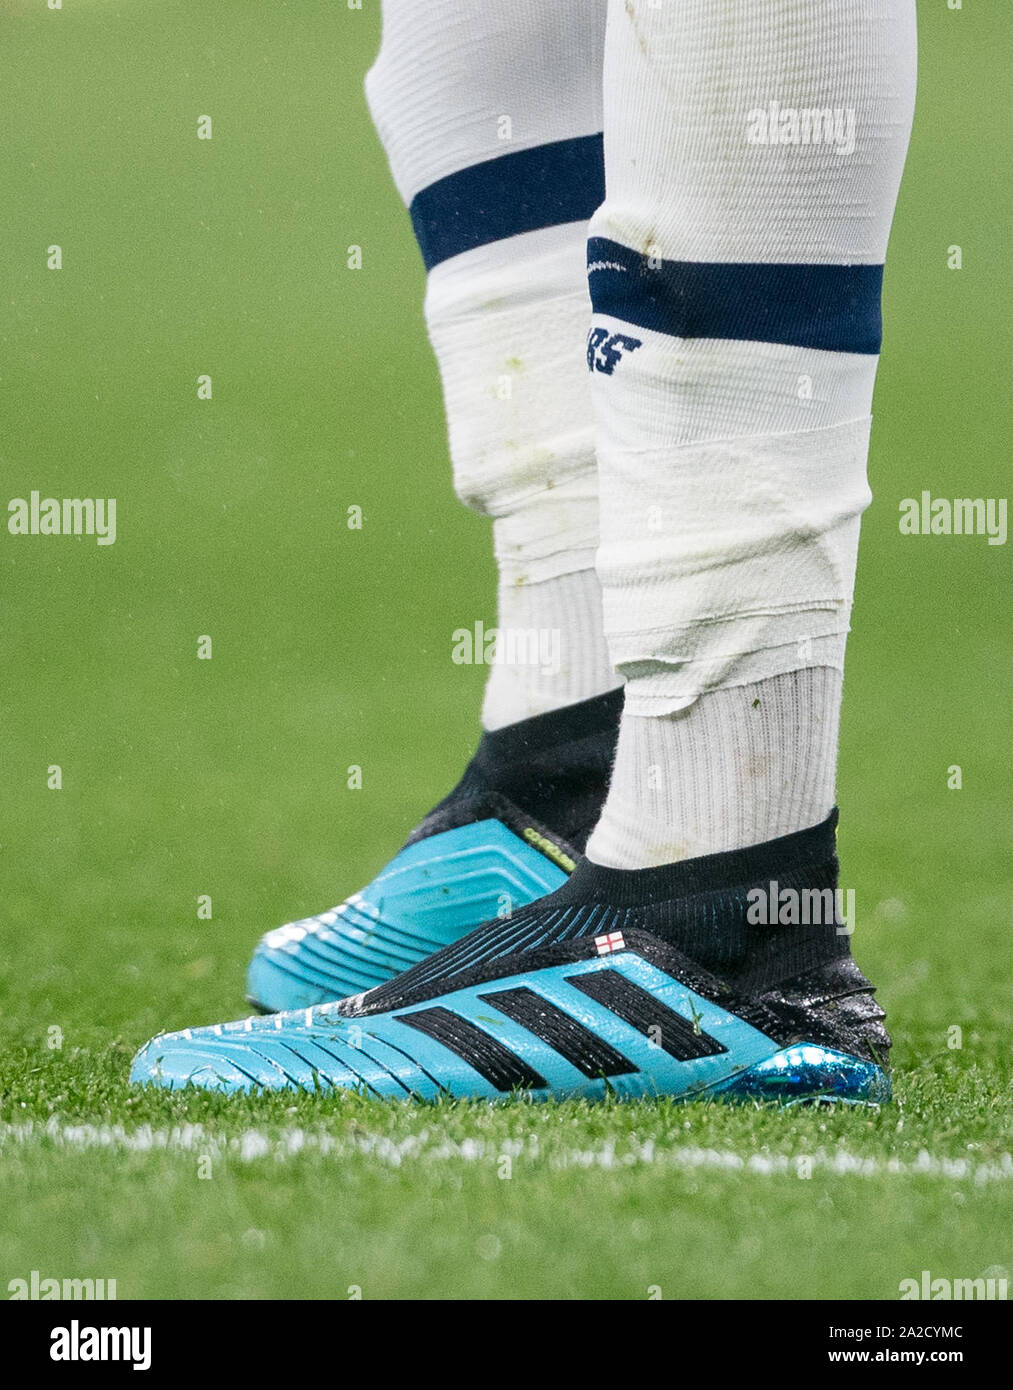 The football boots of Dele Alli of Spurs with England flag during UEFA Champions League group match between Tottenham and Bayern Munich at Wembley Stadium, London, England on 1